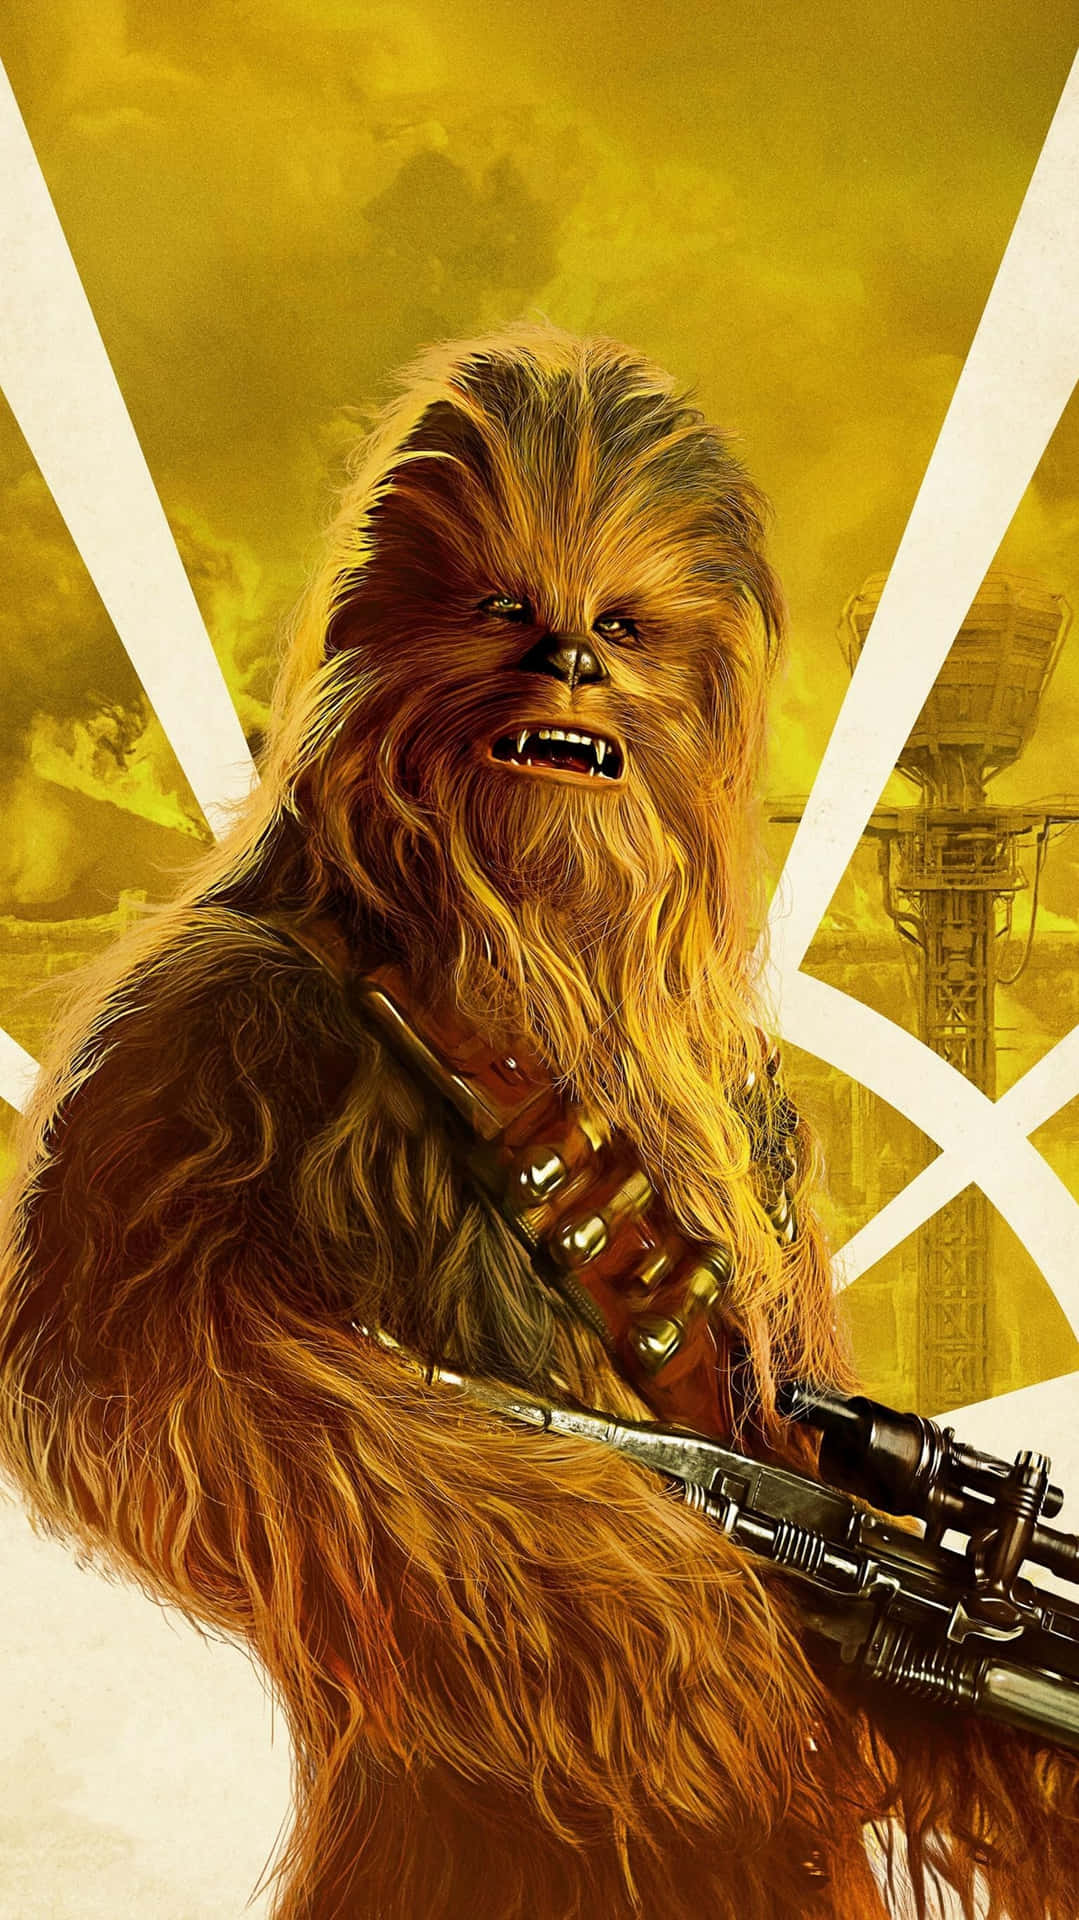 Chewwy the Wookiee, ready to protect the galaxy from evil! Wallpaper